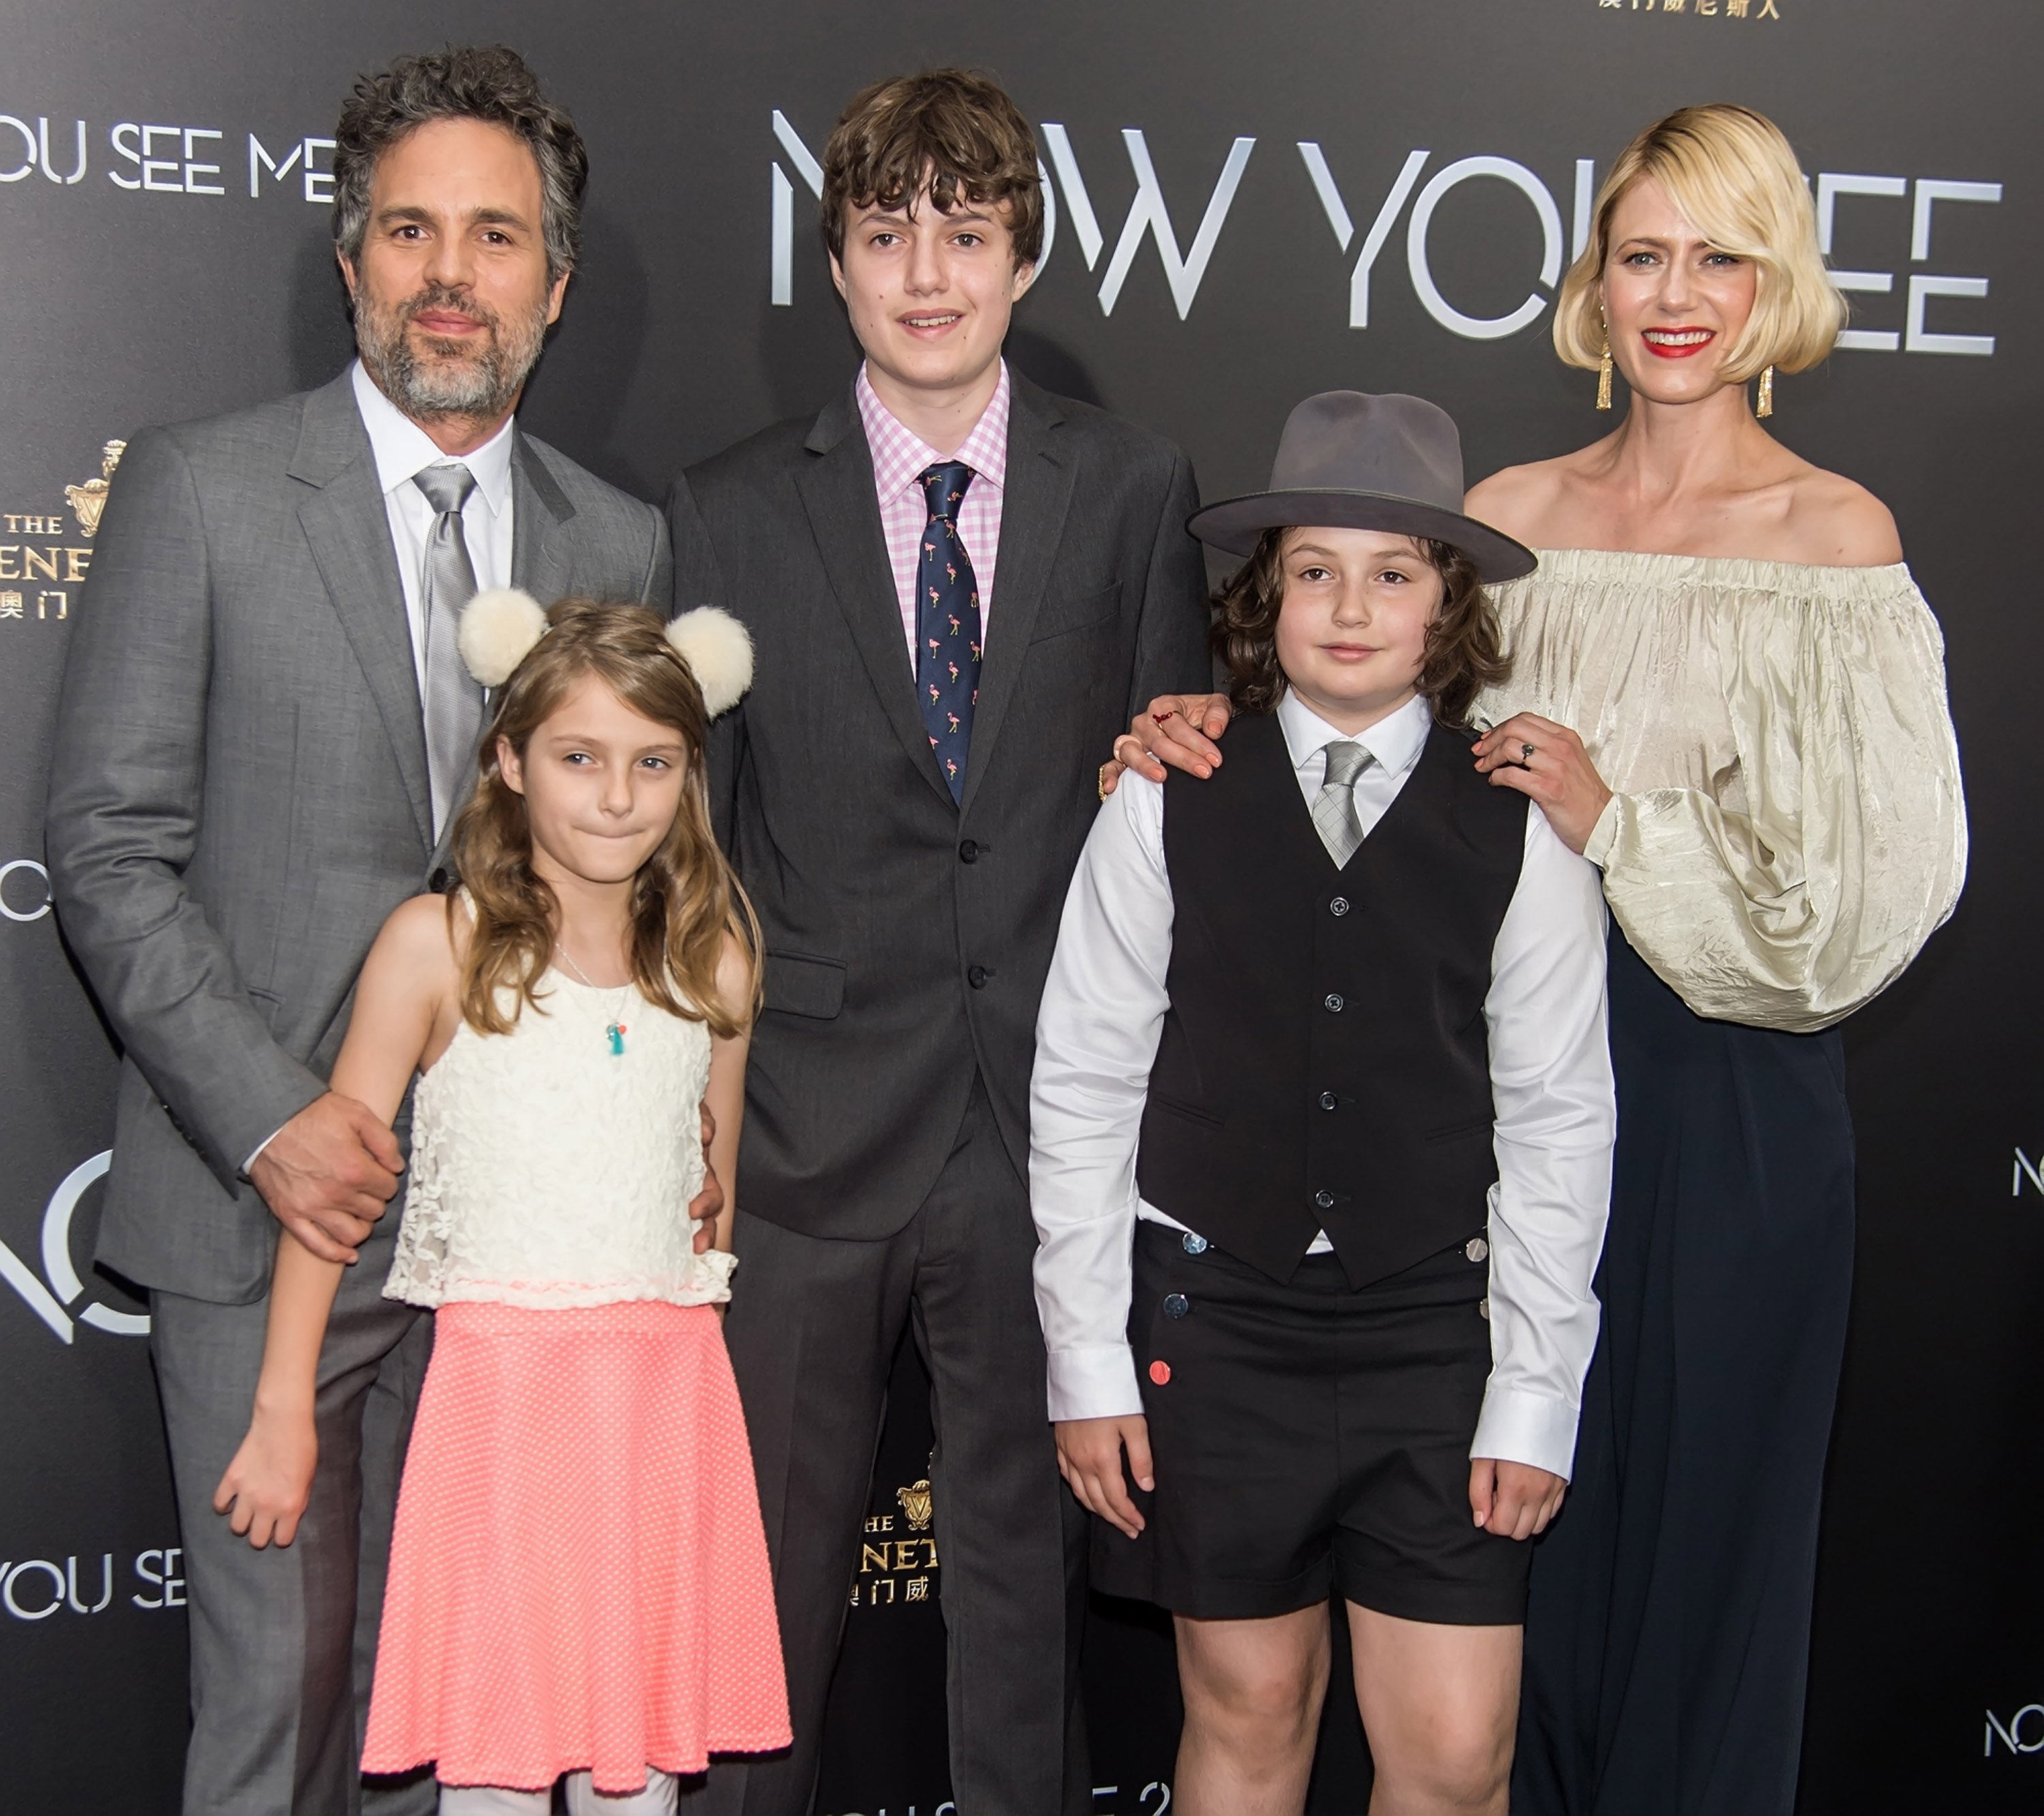 Actor Mark Ruffalo, wife Sunrise Coigney and children Odette Ruffalo, Keen Ruffalo and Bella Ruffalo at the 'Now You See Me 2' World Premiere at AMC Loews Lincoln Square 13 theater on June 6, 2016, in New York City. | Source: Getty Images